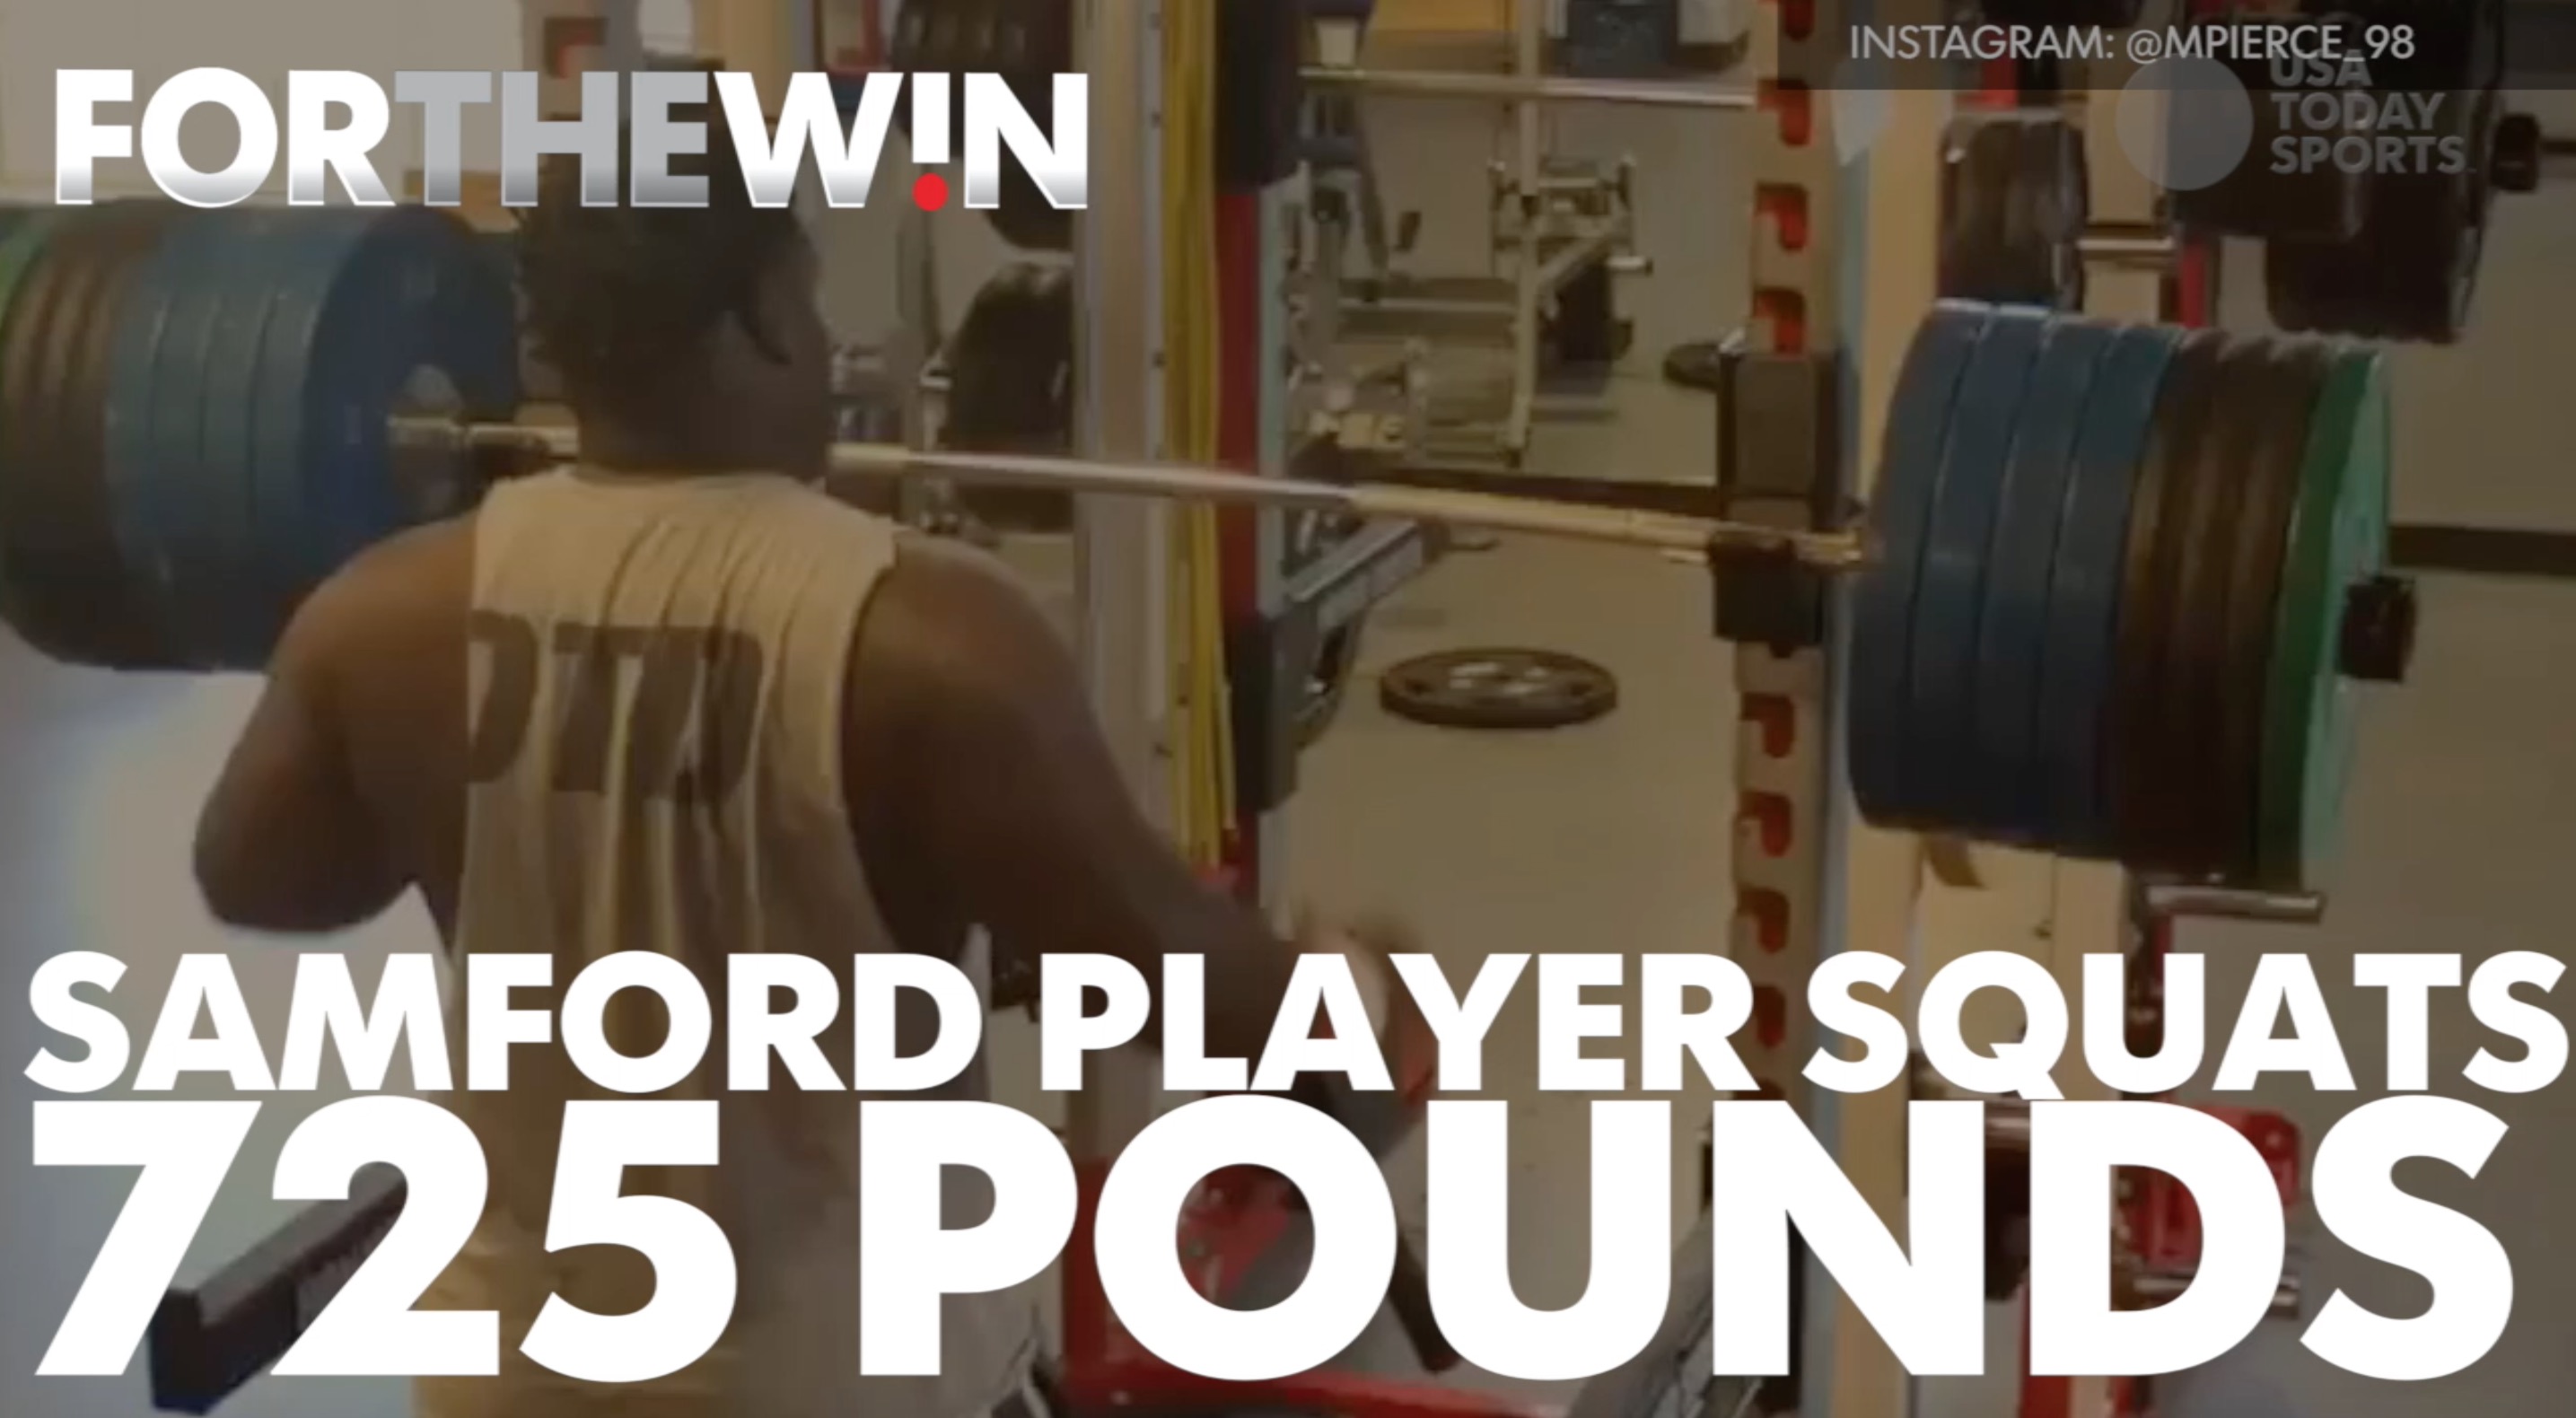 Watch this Samford football player squat 725 pounds